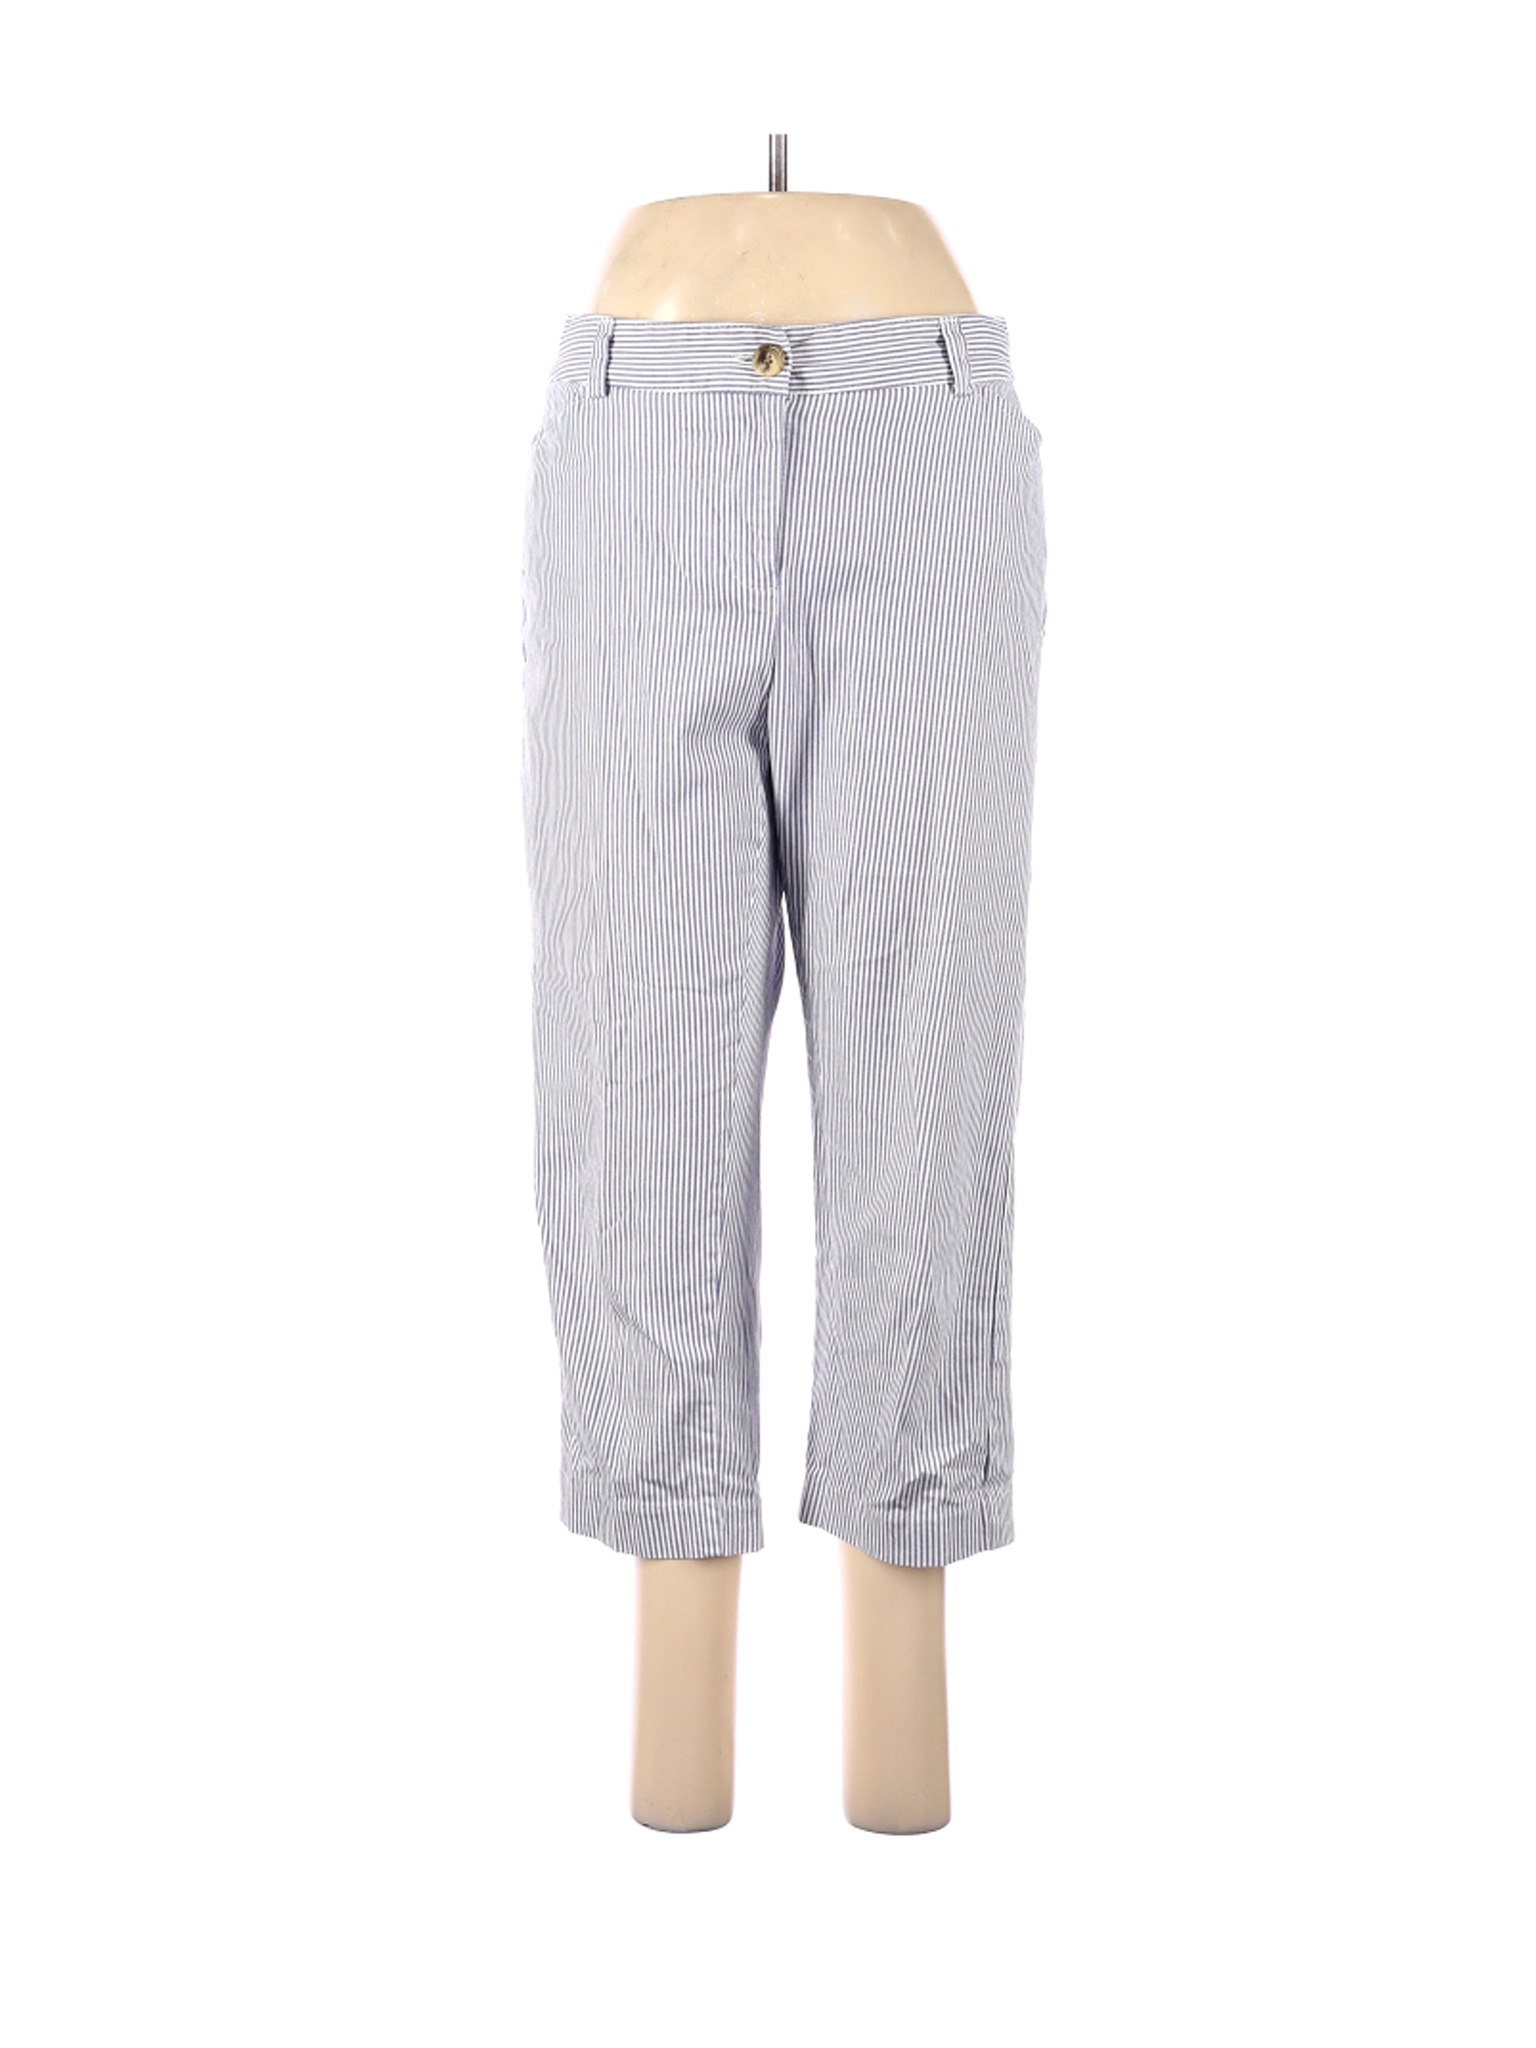 Kim Rogers Women's Pants On Sale Up To 90% Off Retail | thredUP